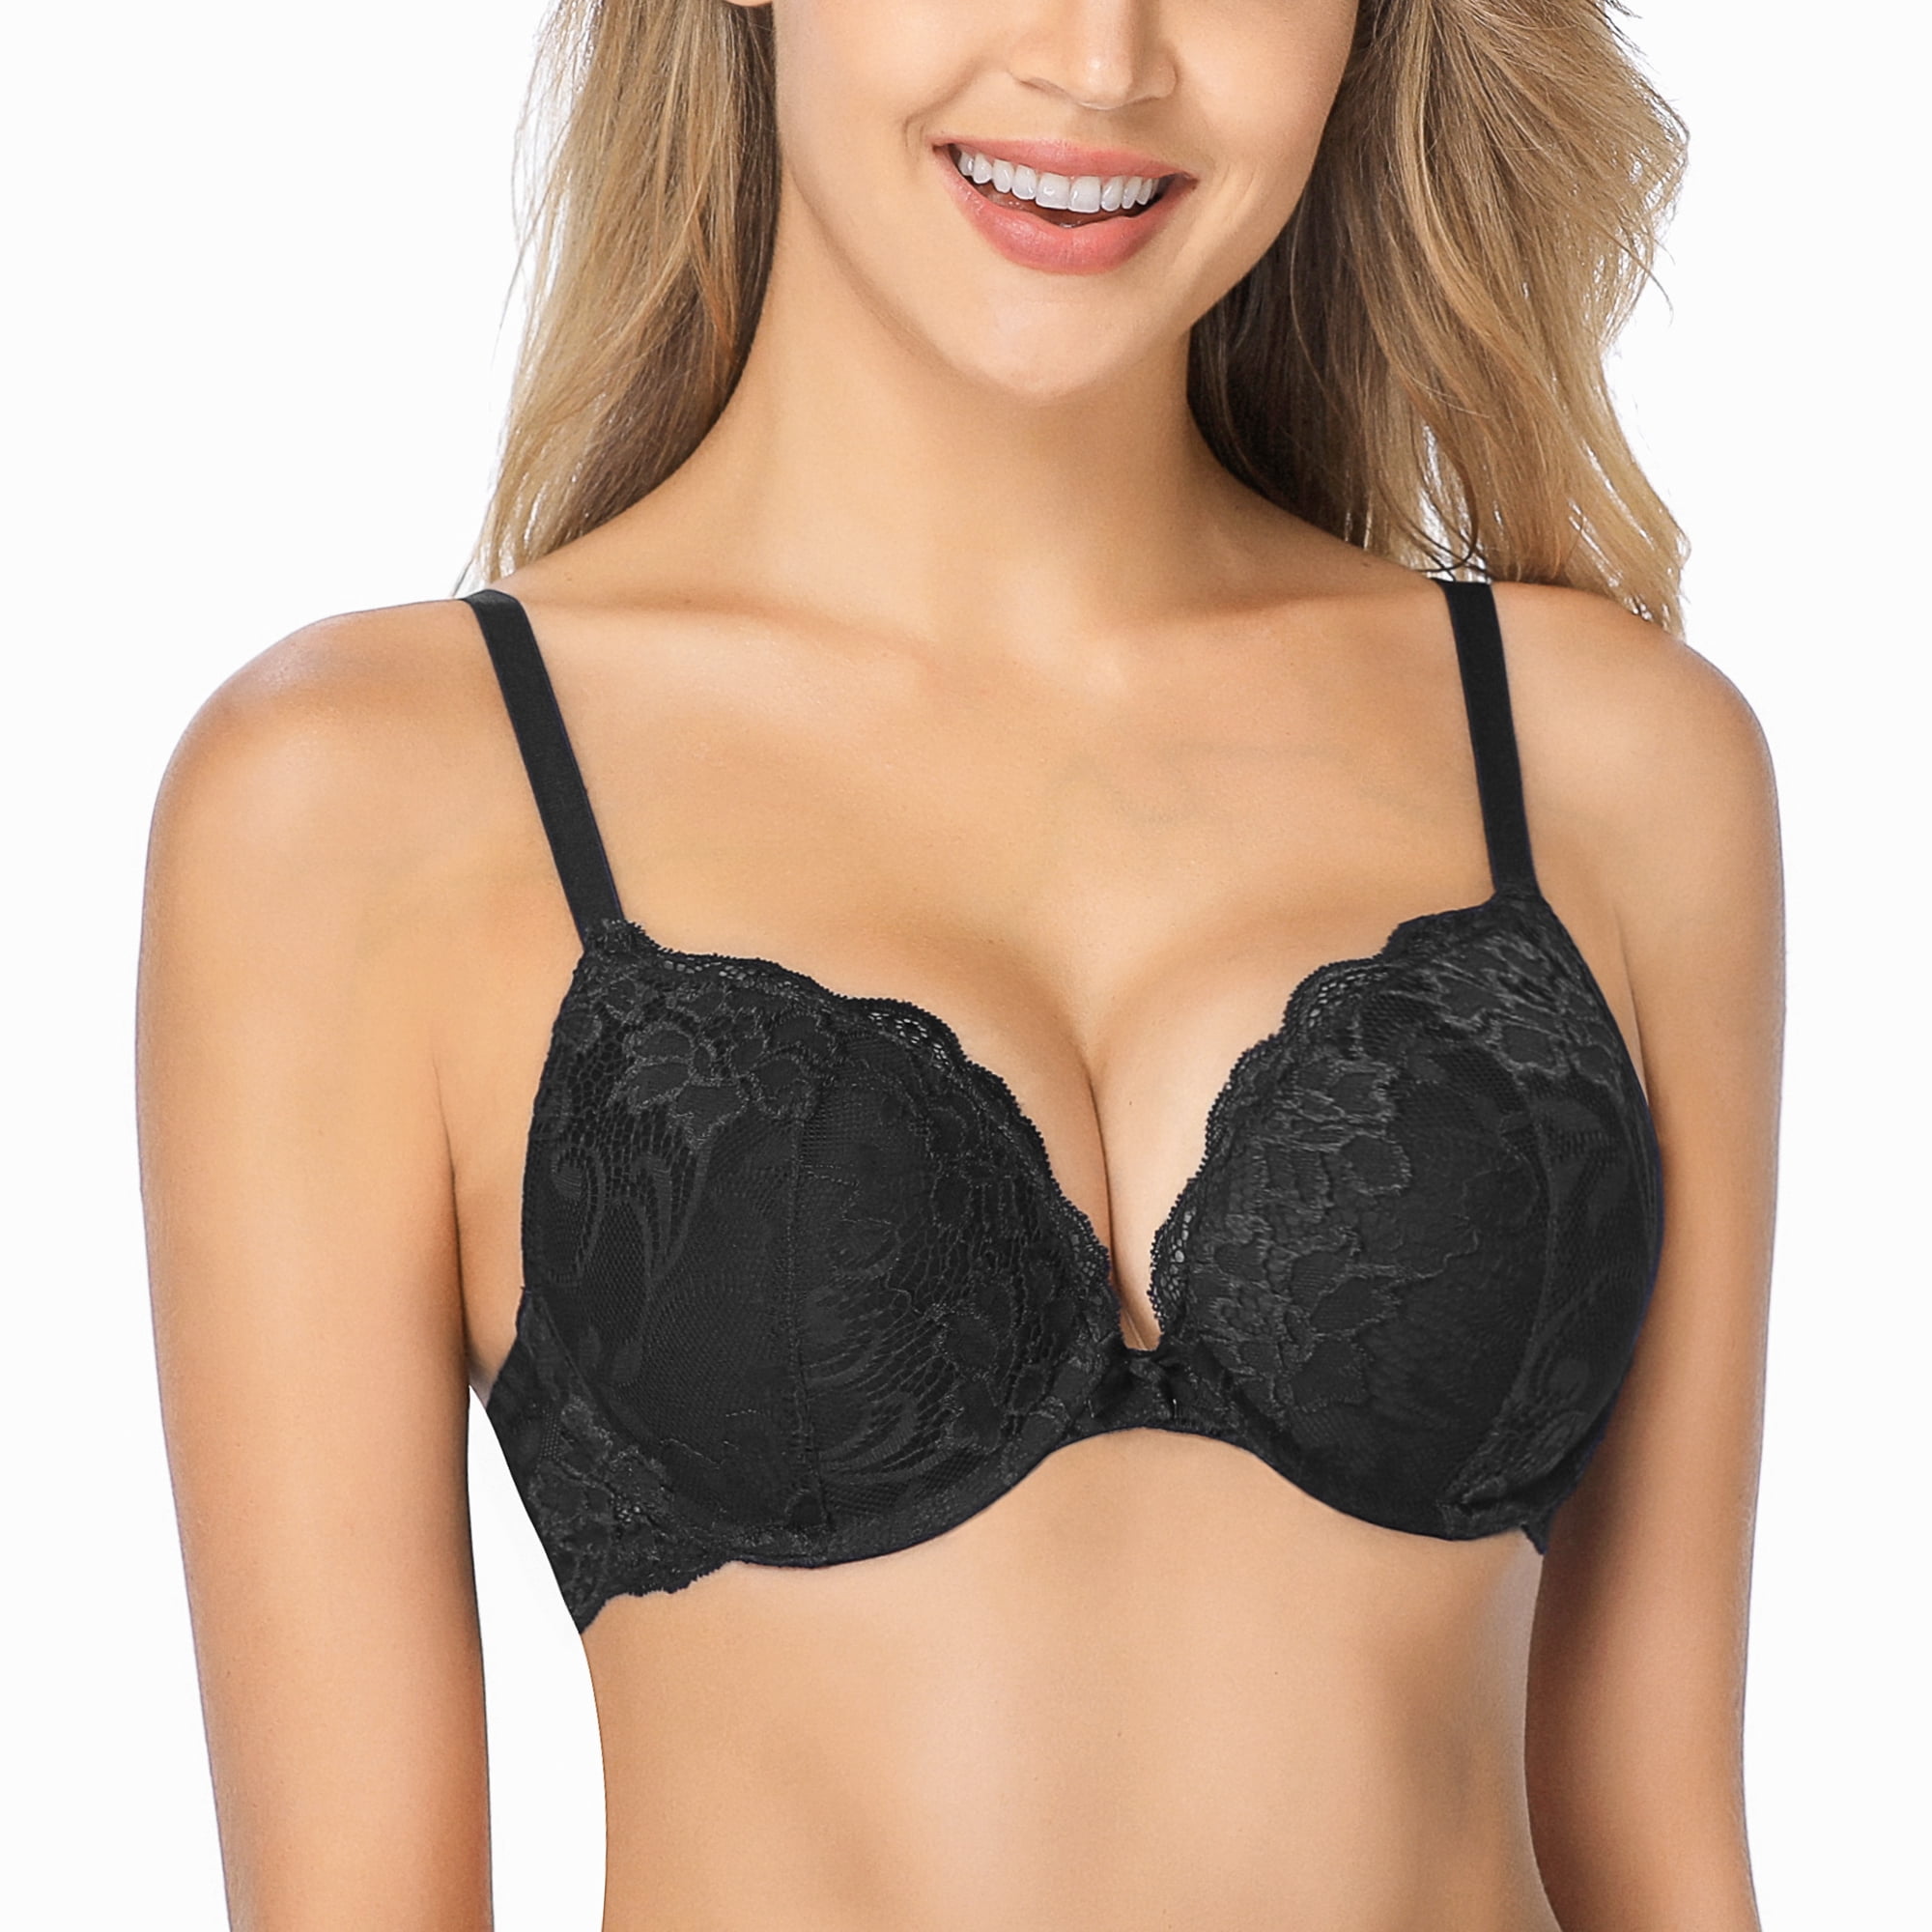 Women's Love My Curves Beautiful Lace Lift Underwire Bra, Style